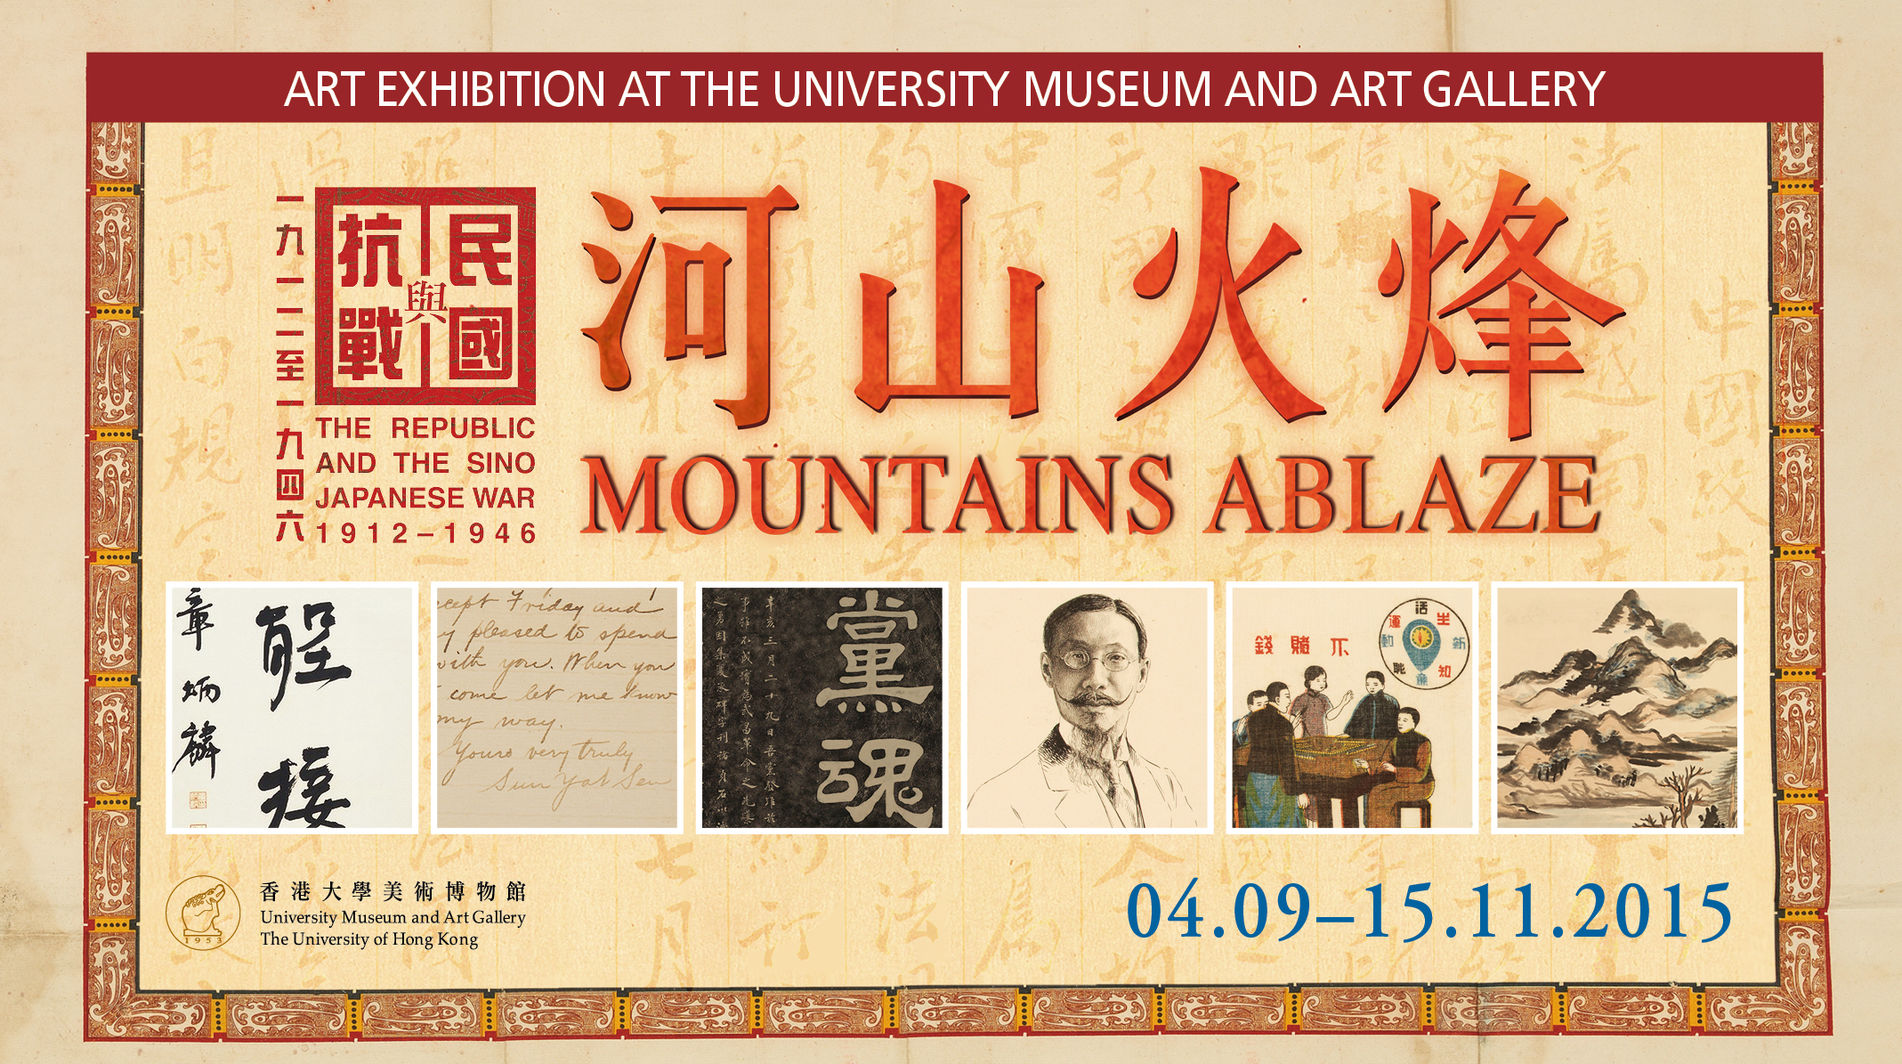 Mountains Ablaze: The Republic and the Sino Japanese War (1912-1946)